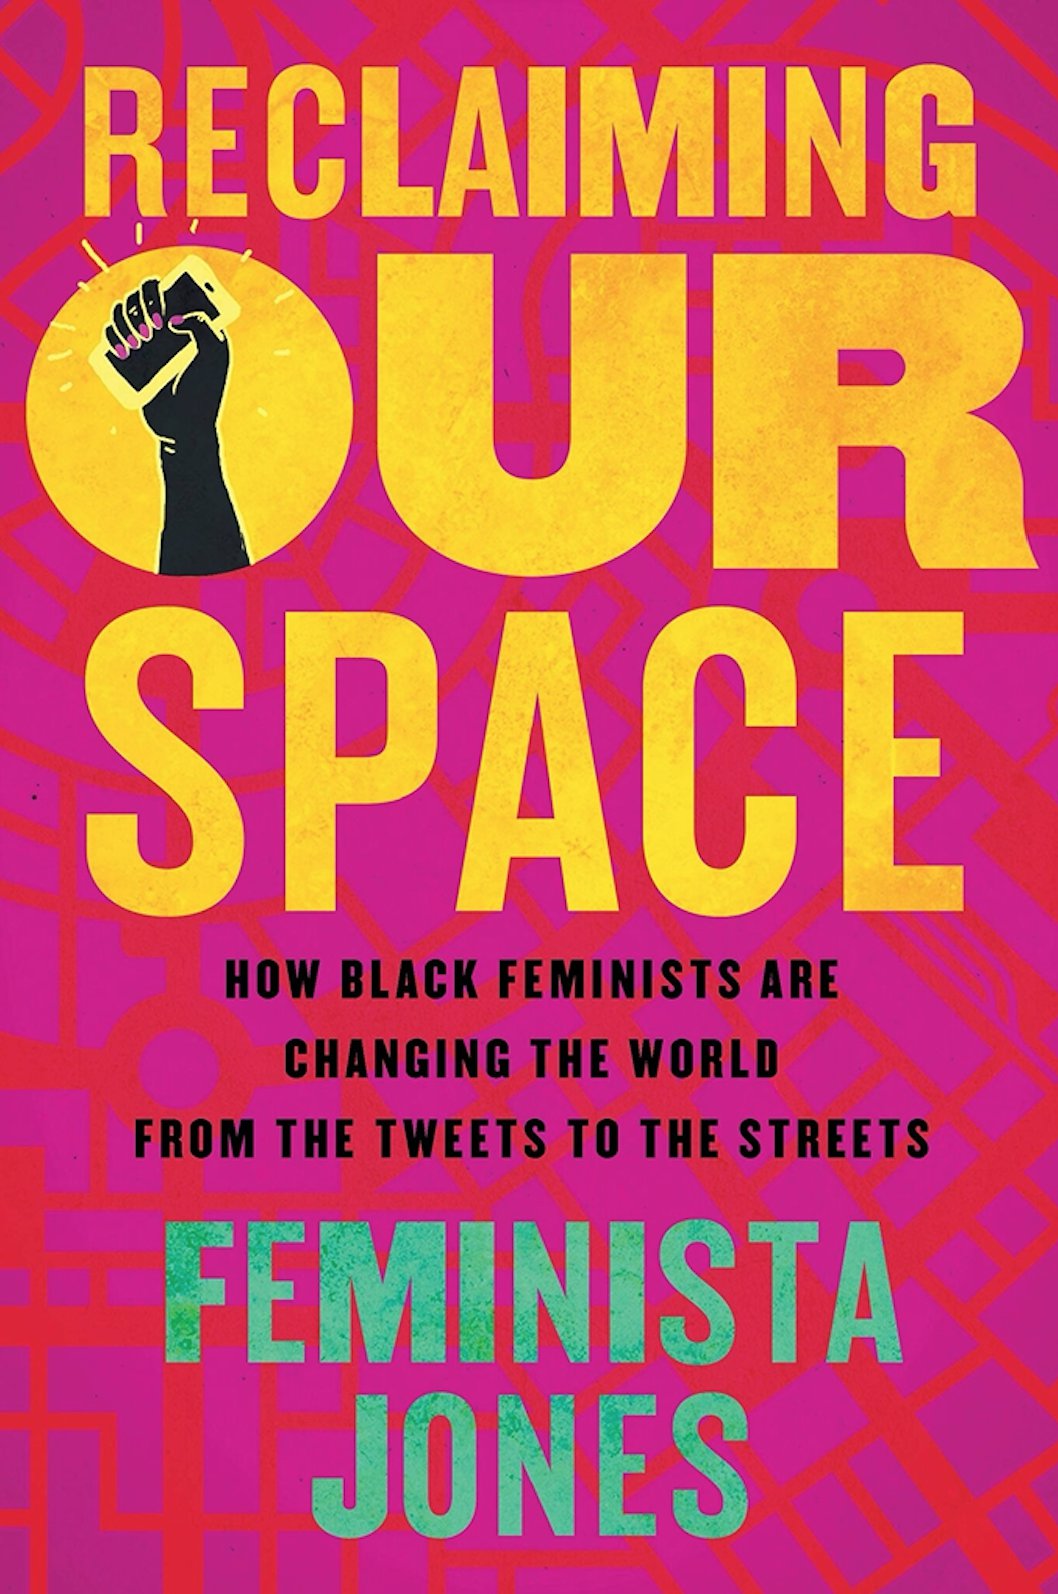 Black Feminism And The Internet